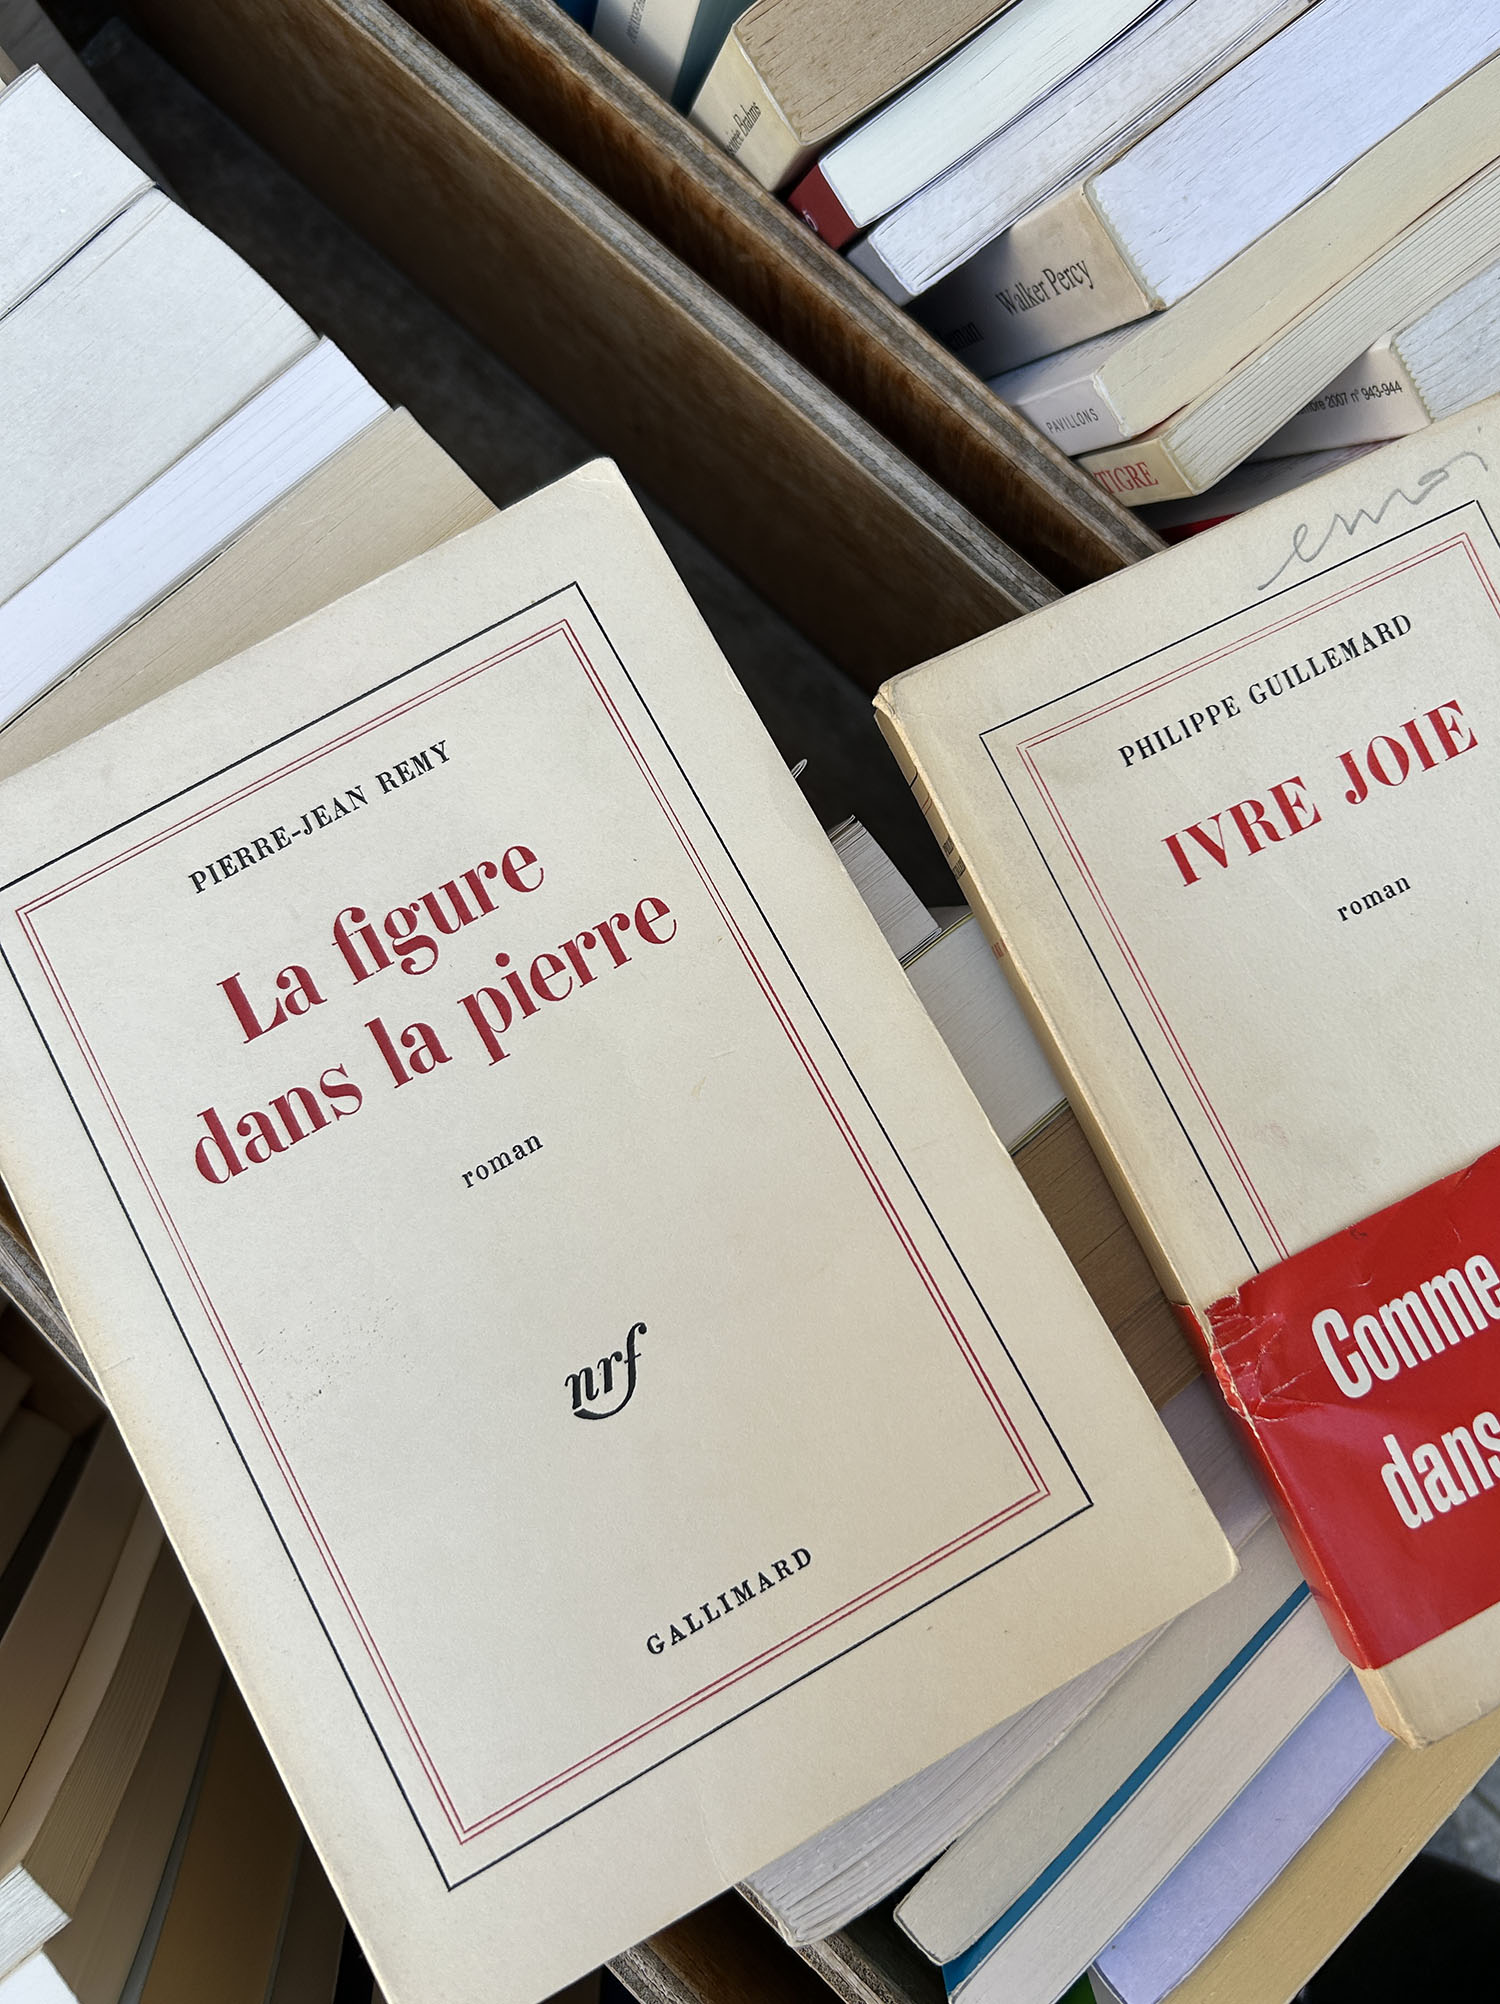 Coco & Voltaire - Two vintage Editions Gallimard books at Le Dilettante in Paris, France